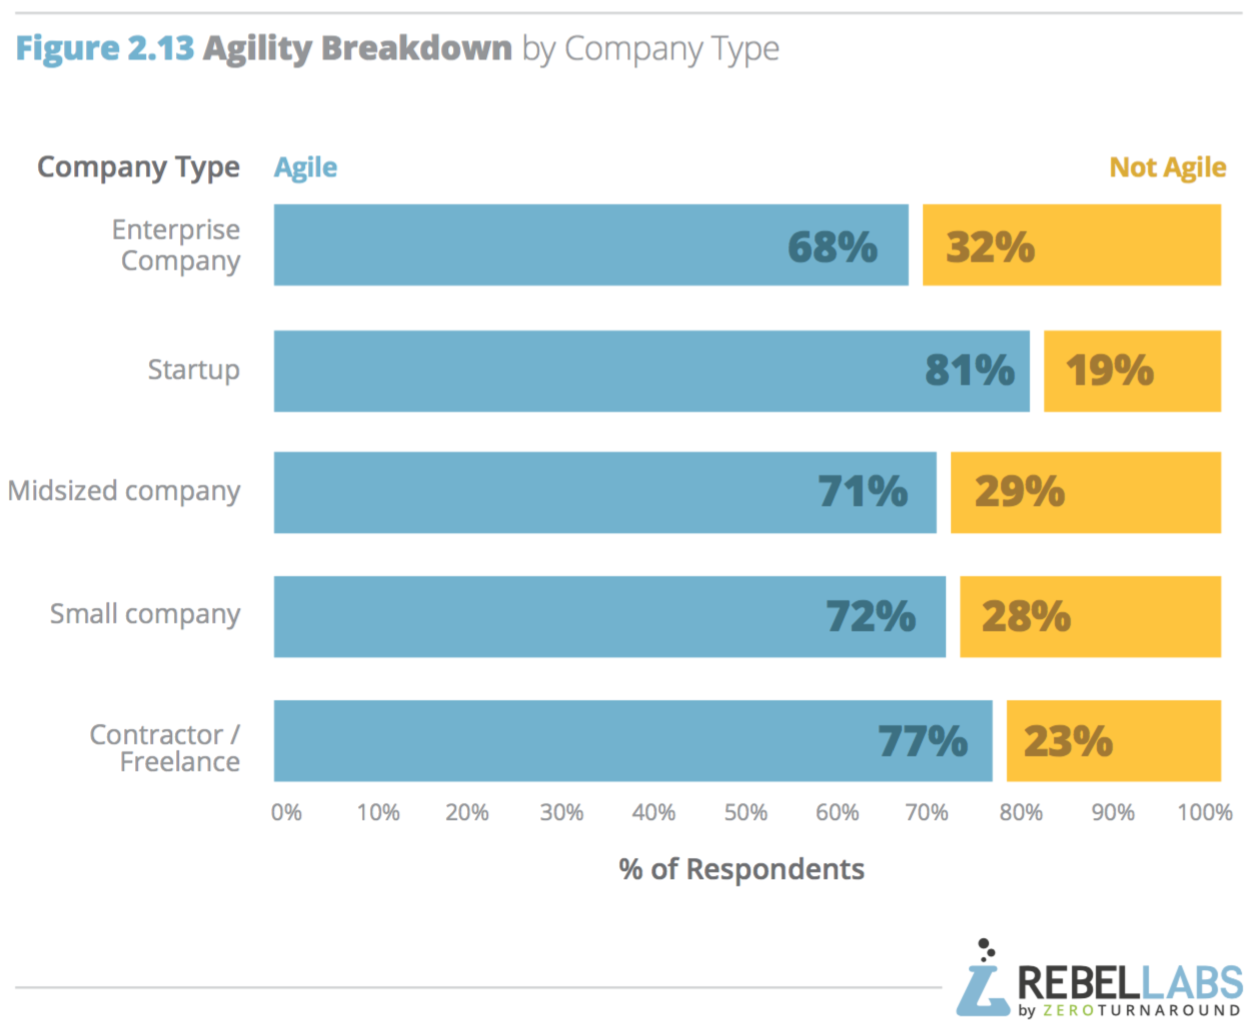 bar graph of repsondents who consider themselves agile by company type